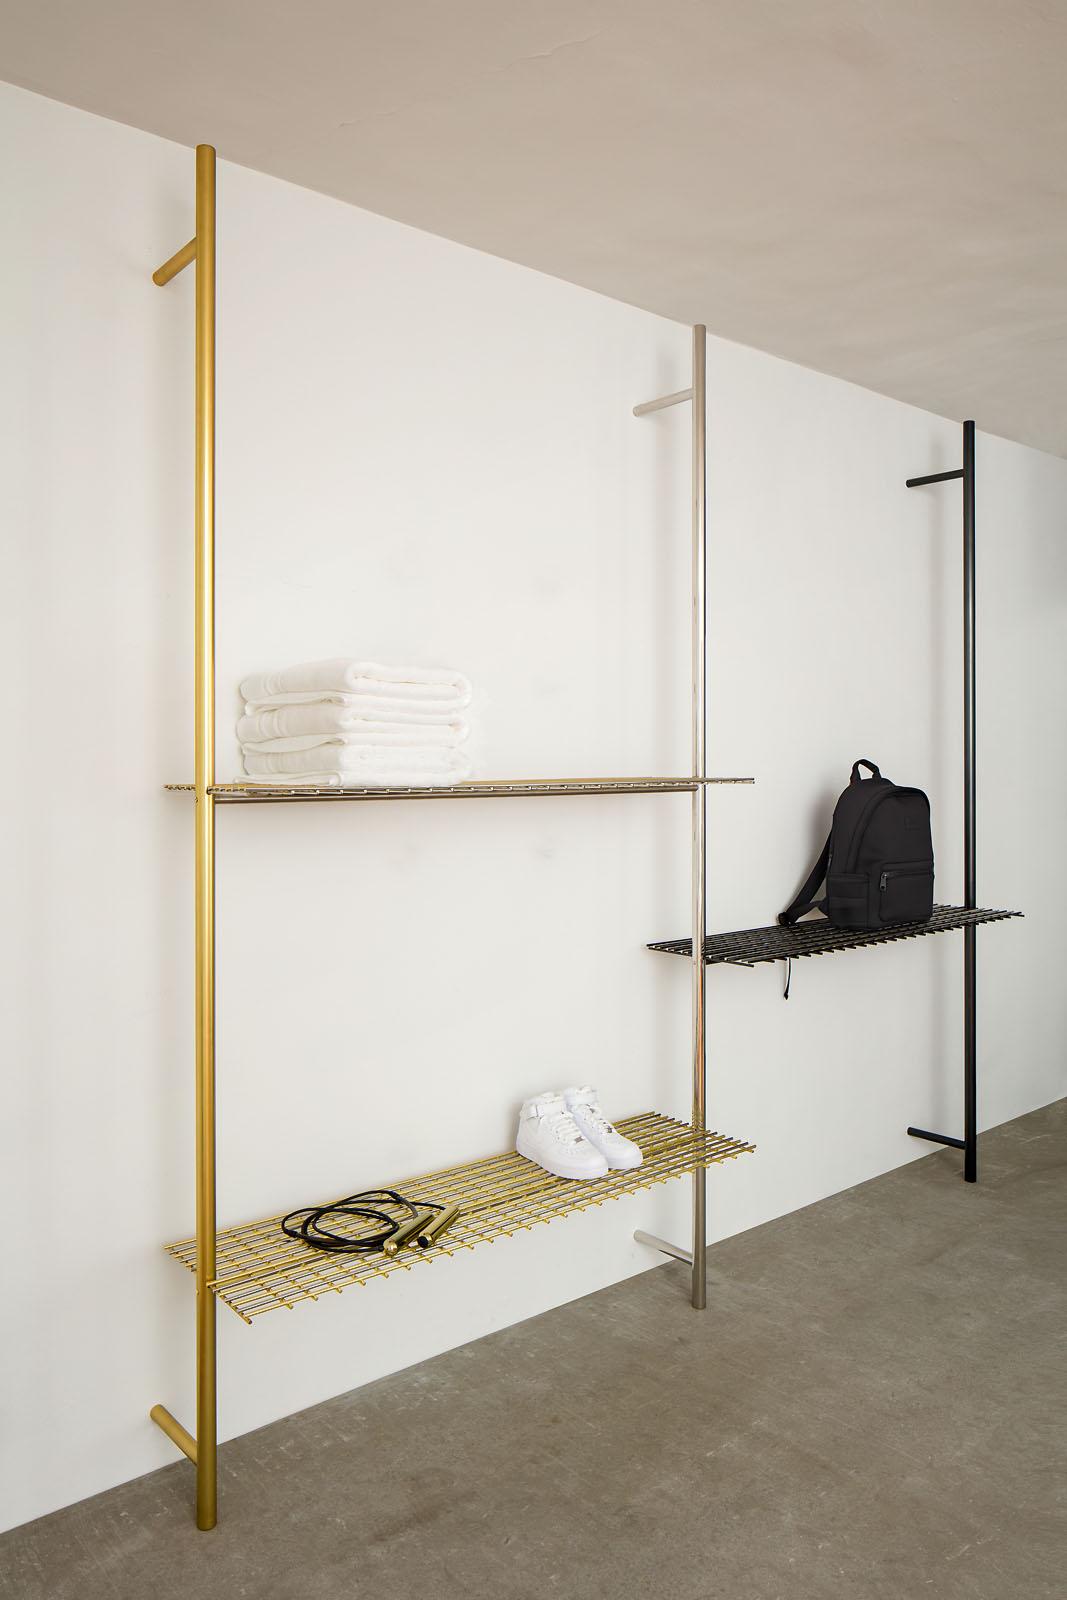 This triple post wall-mounting shelving unit is a mixture of metal finishes and colors. The grid-like shelves with its sleek lines bring an element of airiness and open spaces. 

This item requires two professional contractors for assemble and